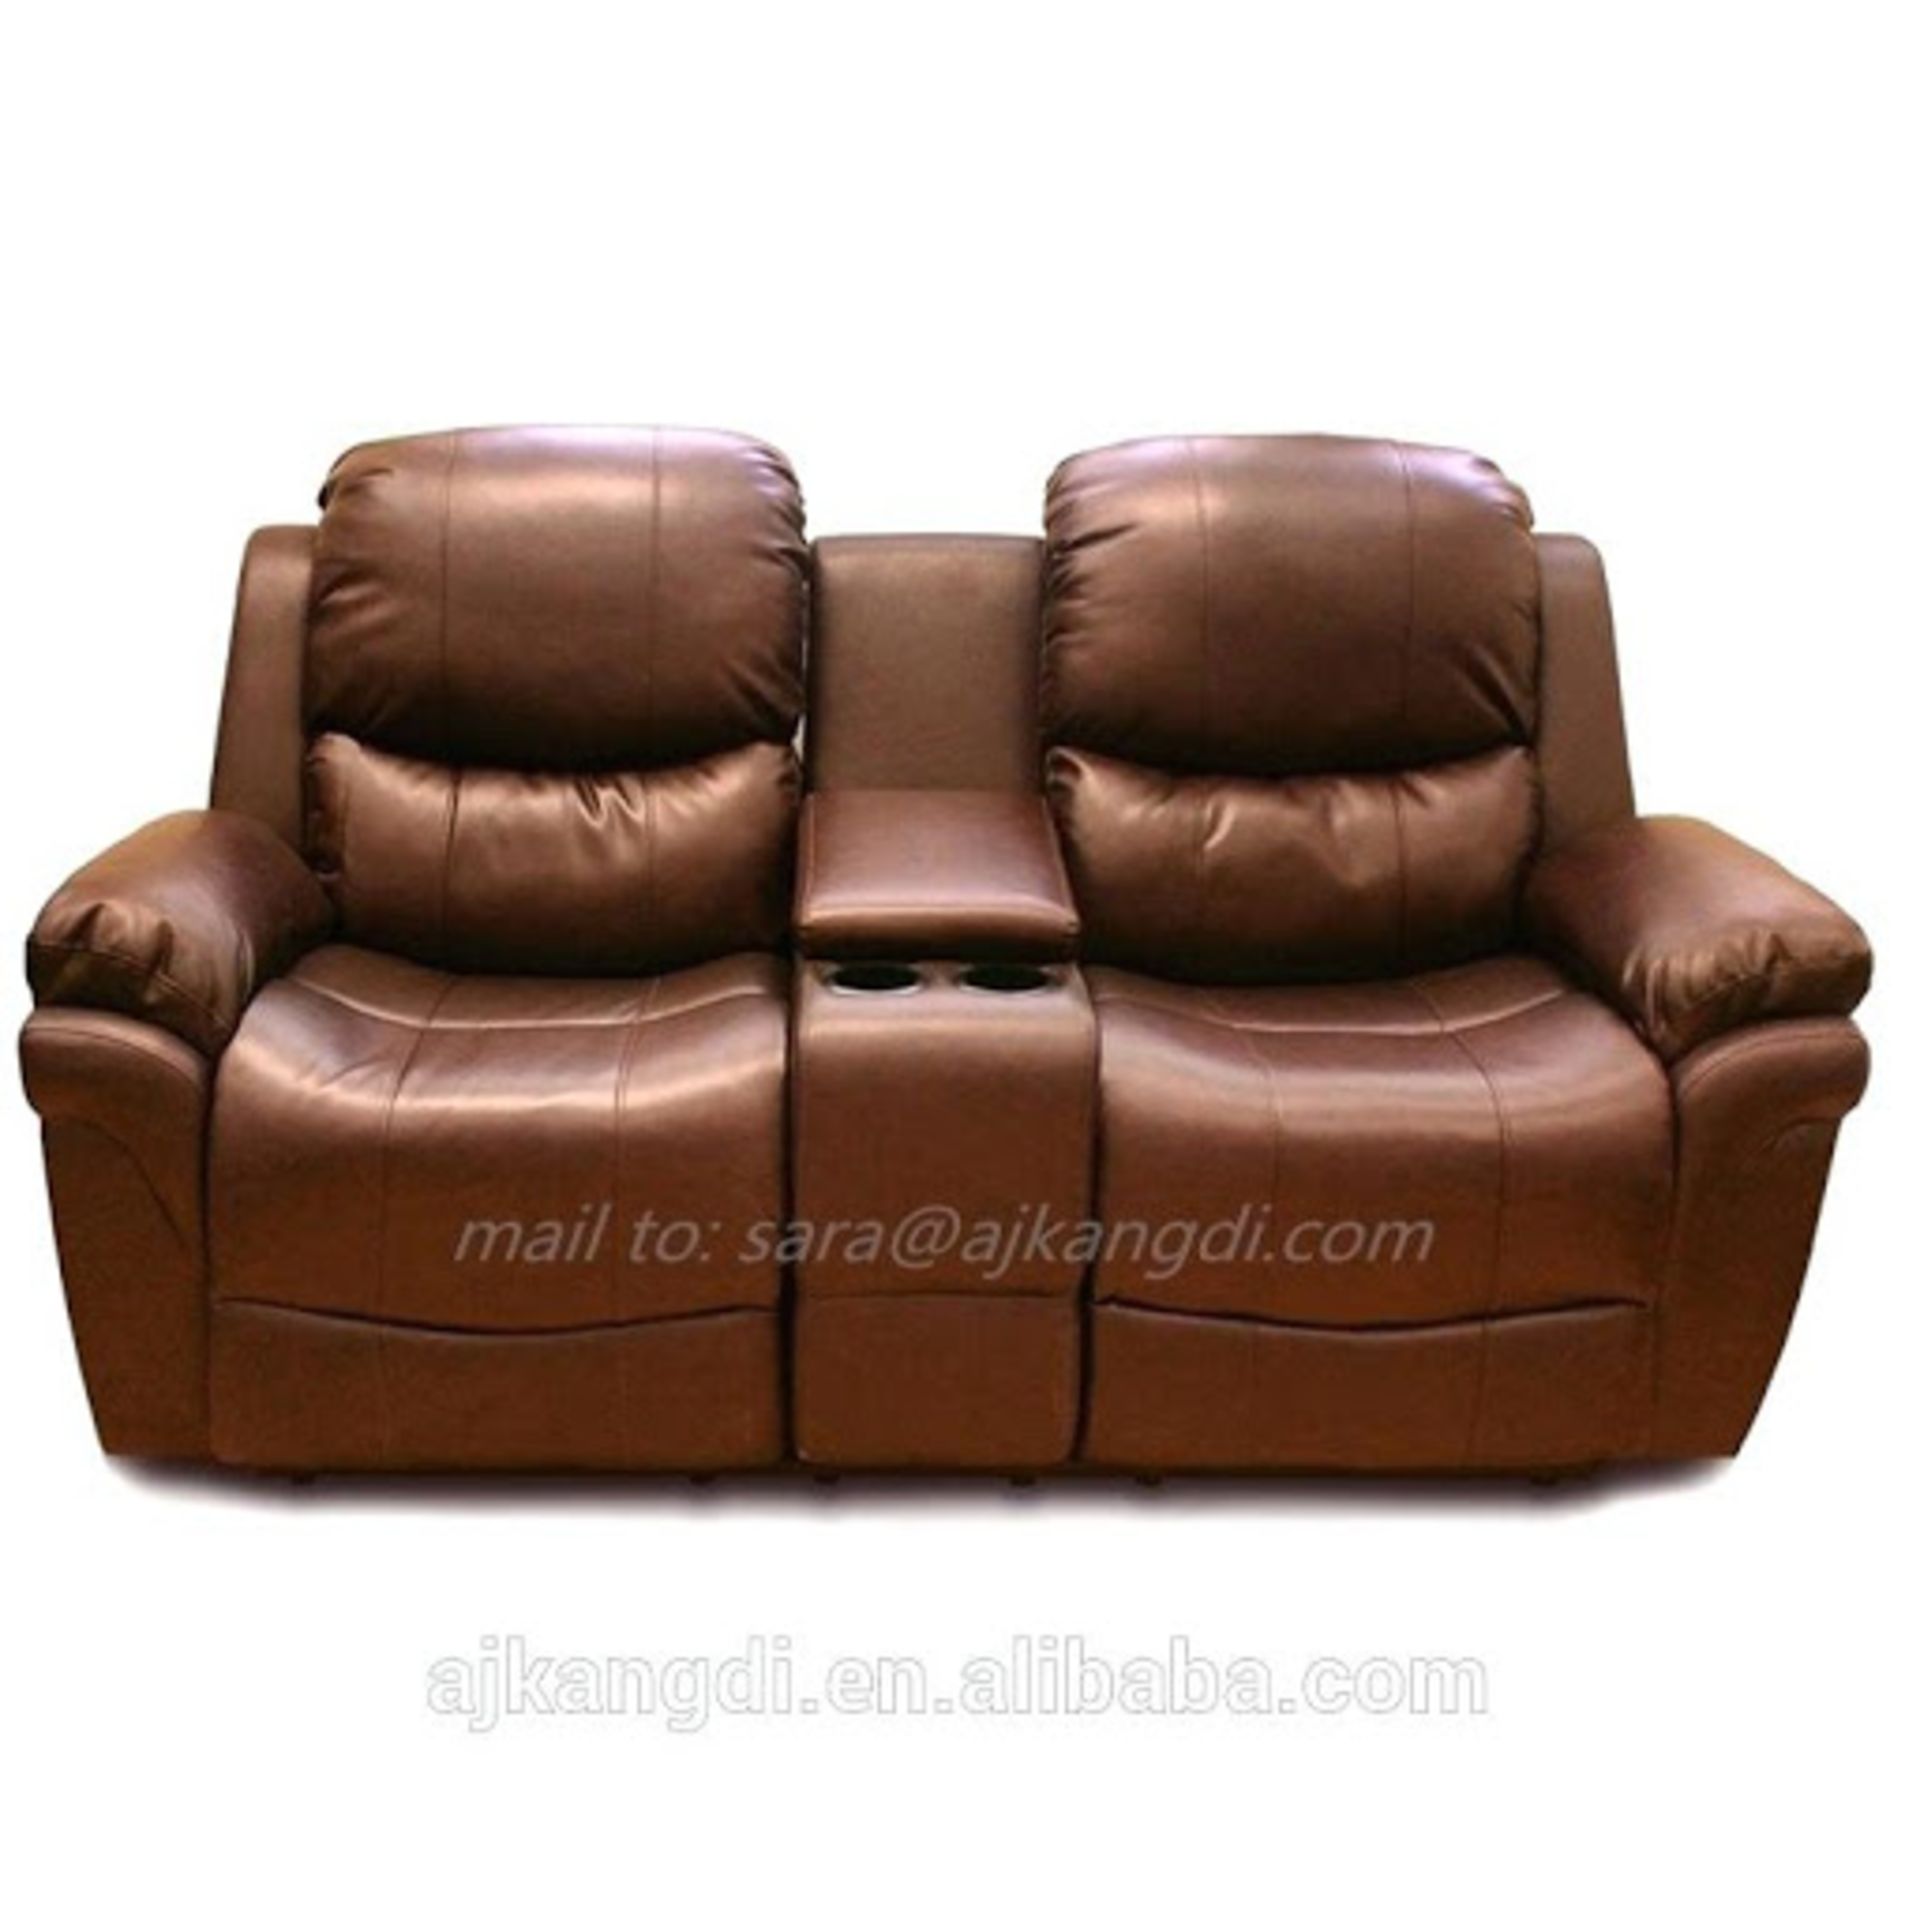 BRAND NEW BOXED 2 SEATER SUPREME LEATHER RECLINING SOFA WITH CONSOLE AND DRINKS HOLDERS